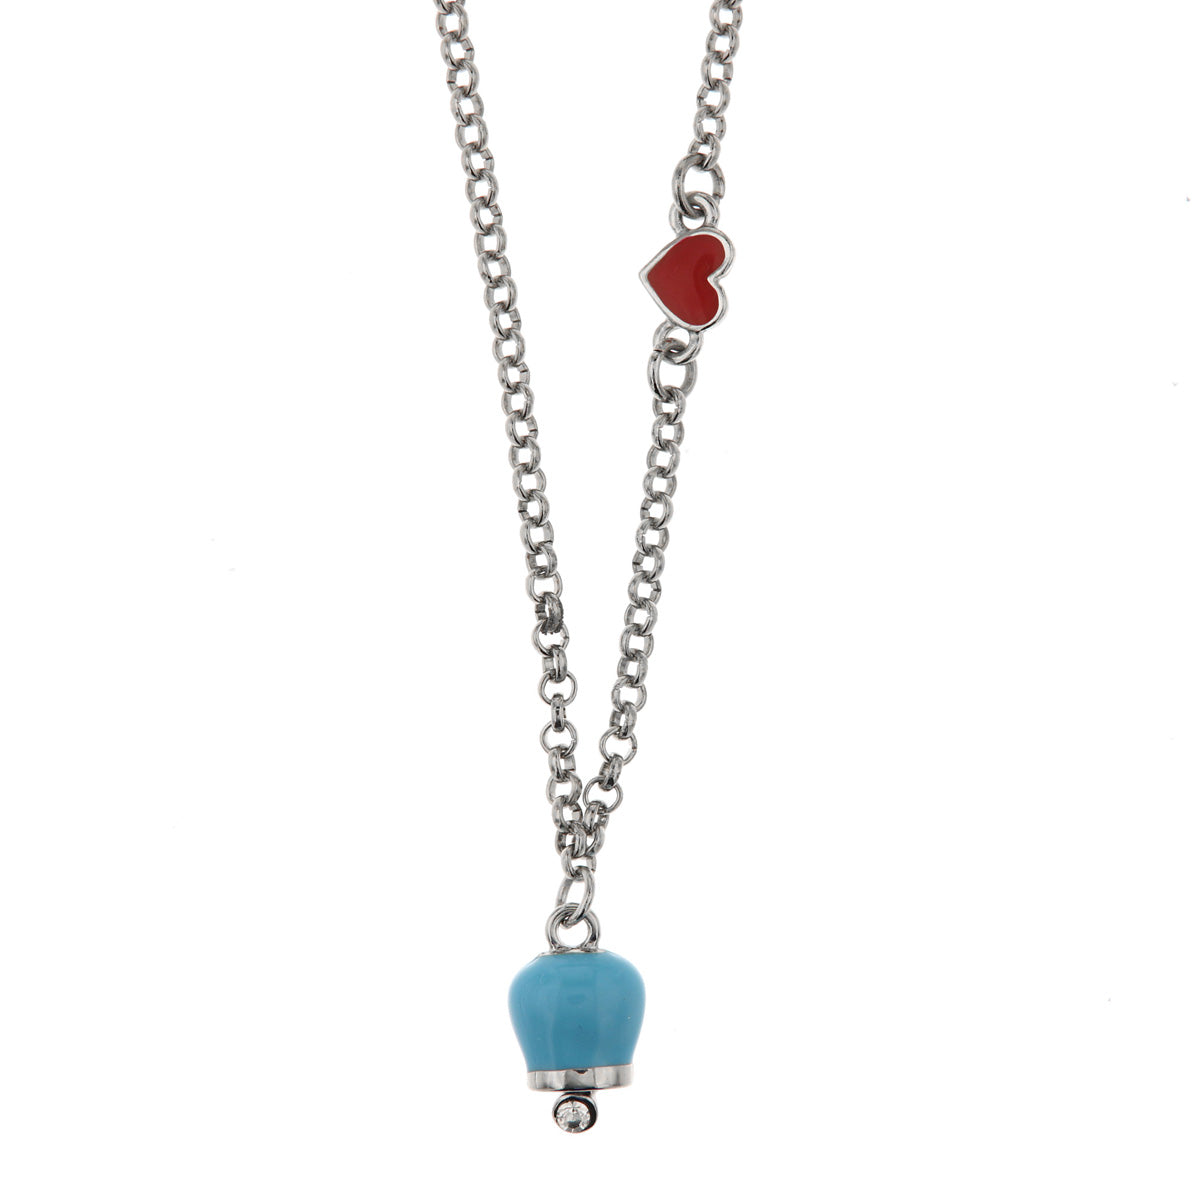 Metal necklace with red heart and bouncing bille pendant with blue enamel, embellished with light point